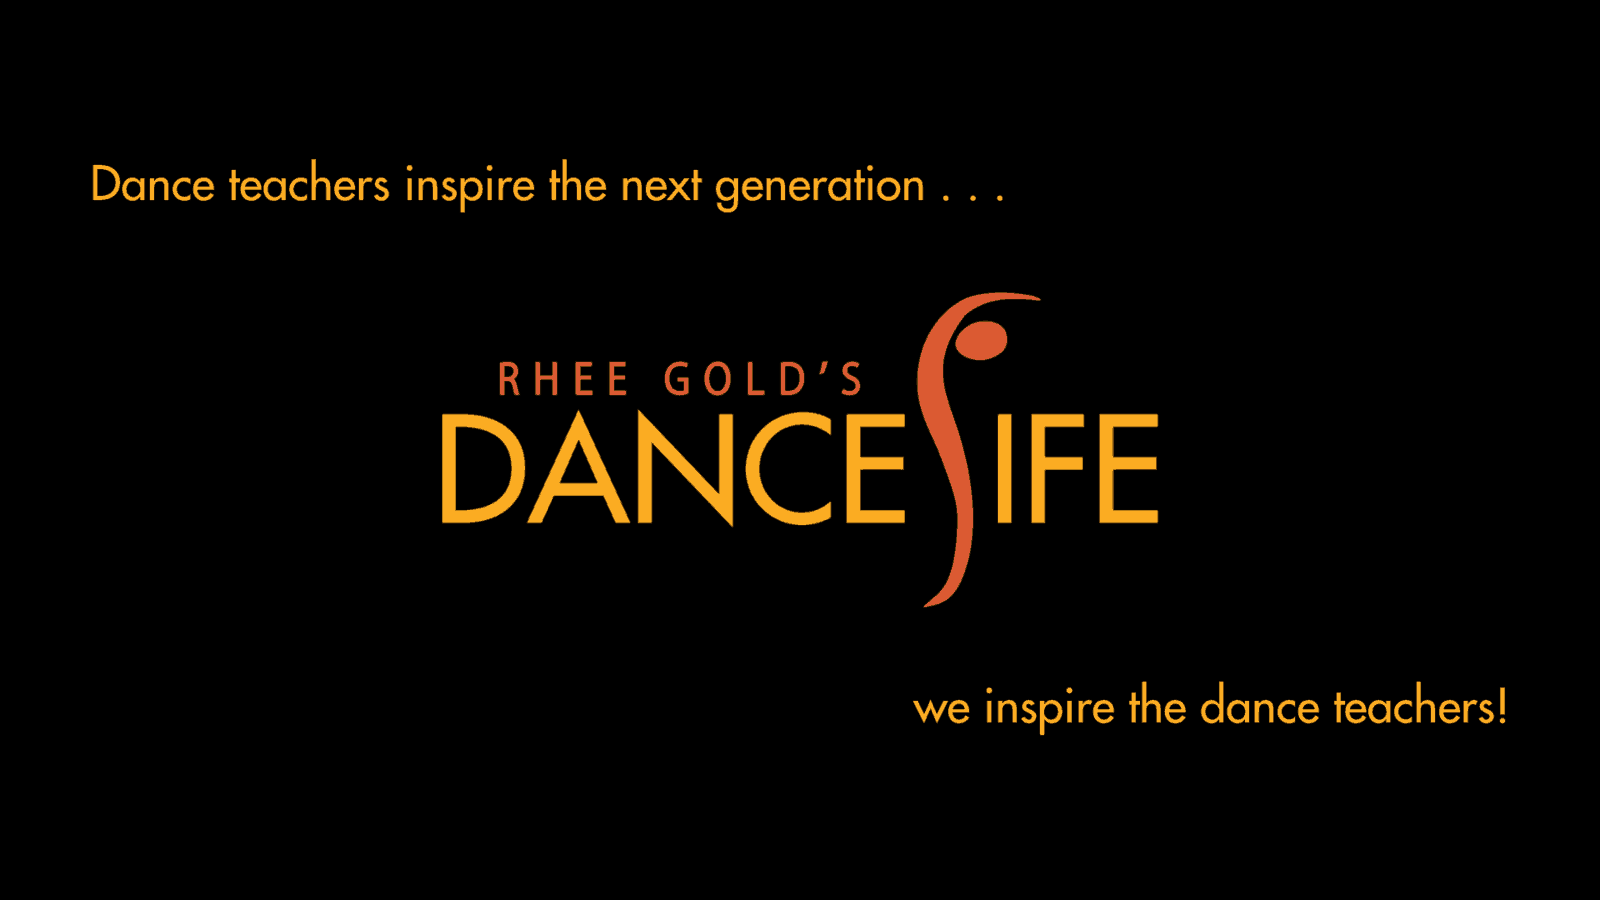 Inspiring the dance education field for more than two decades